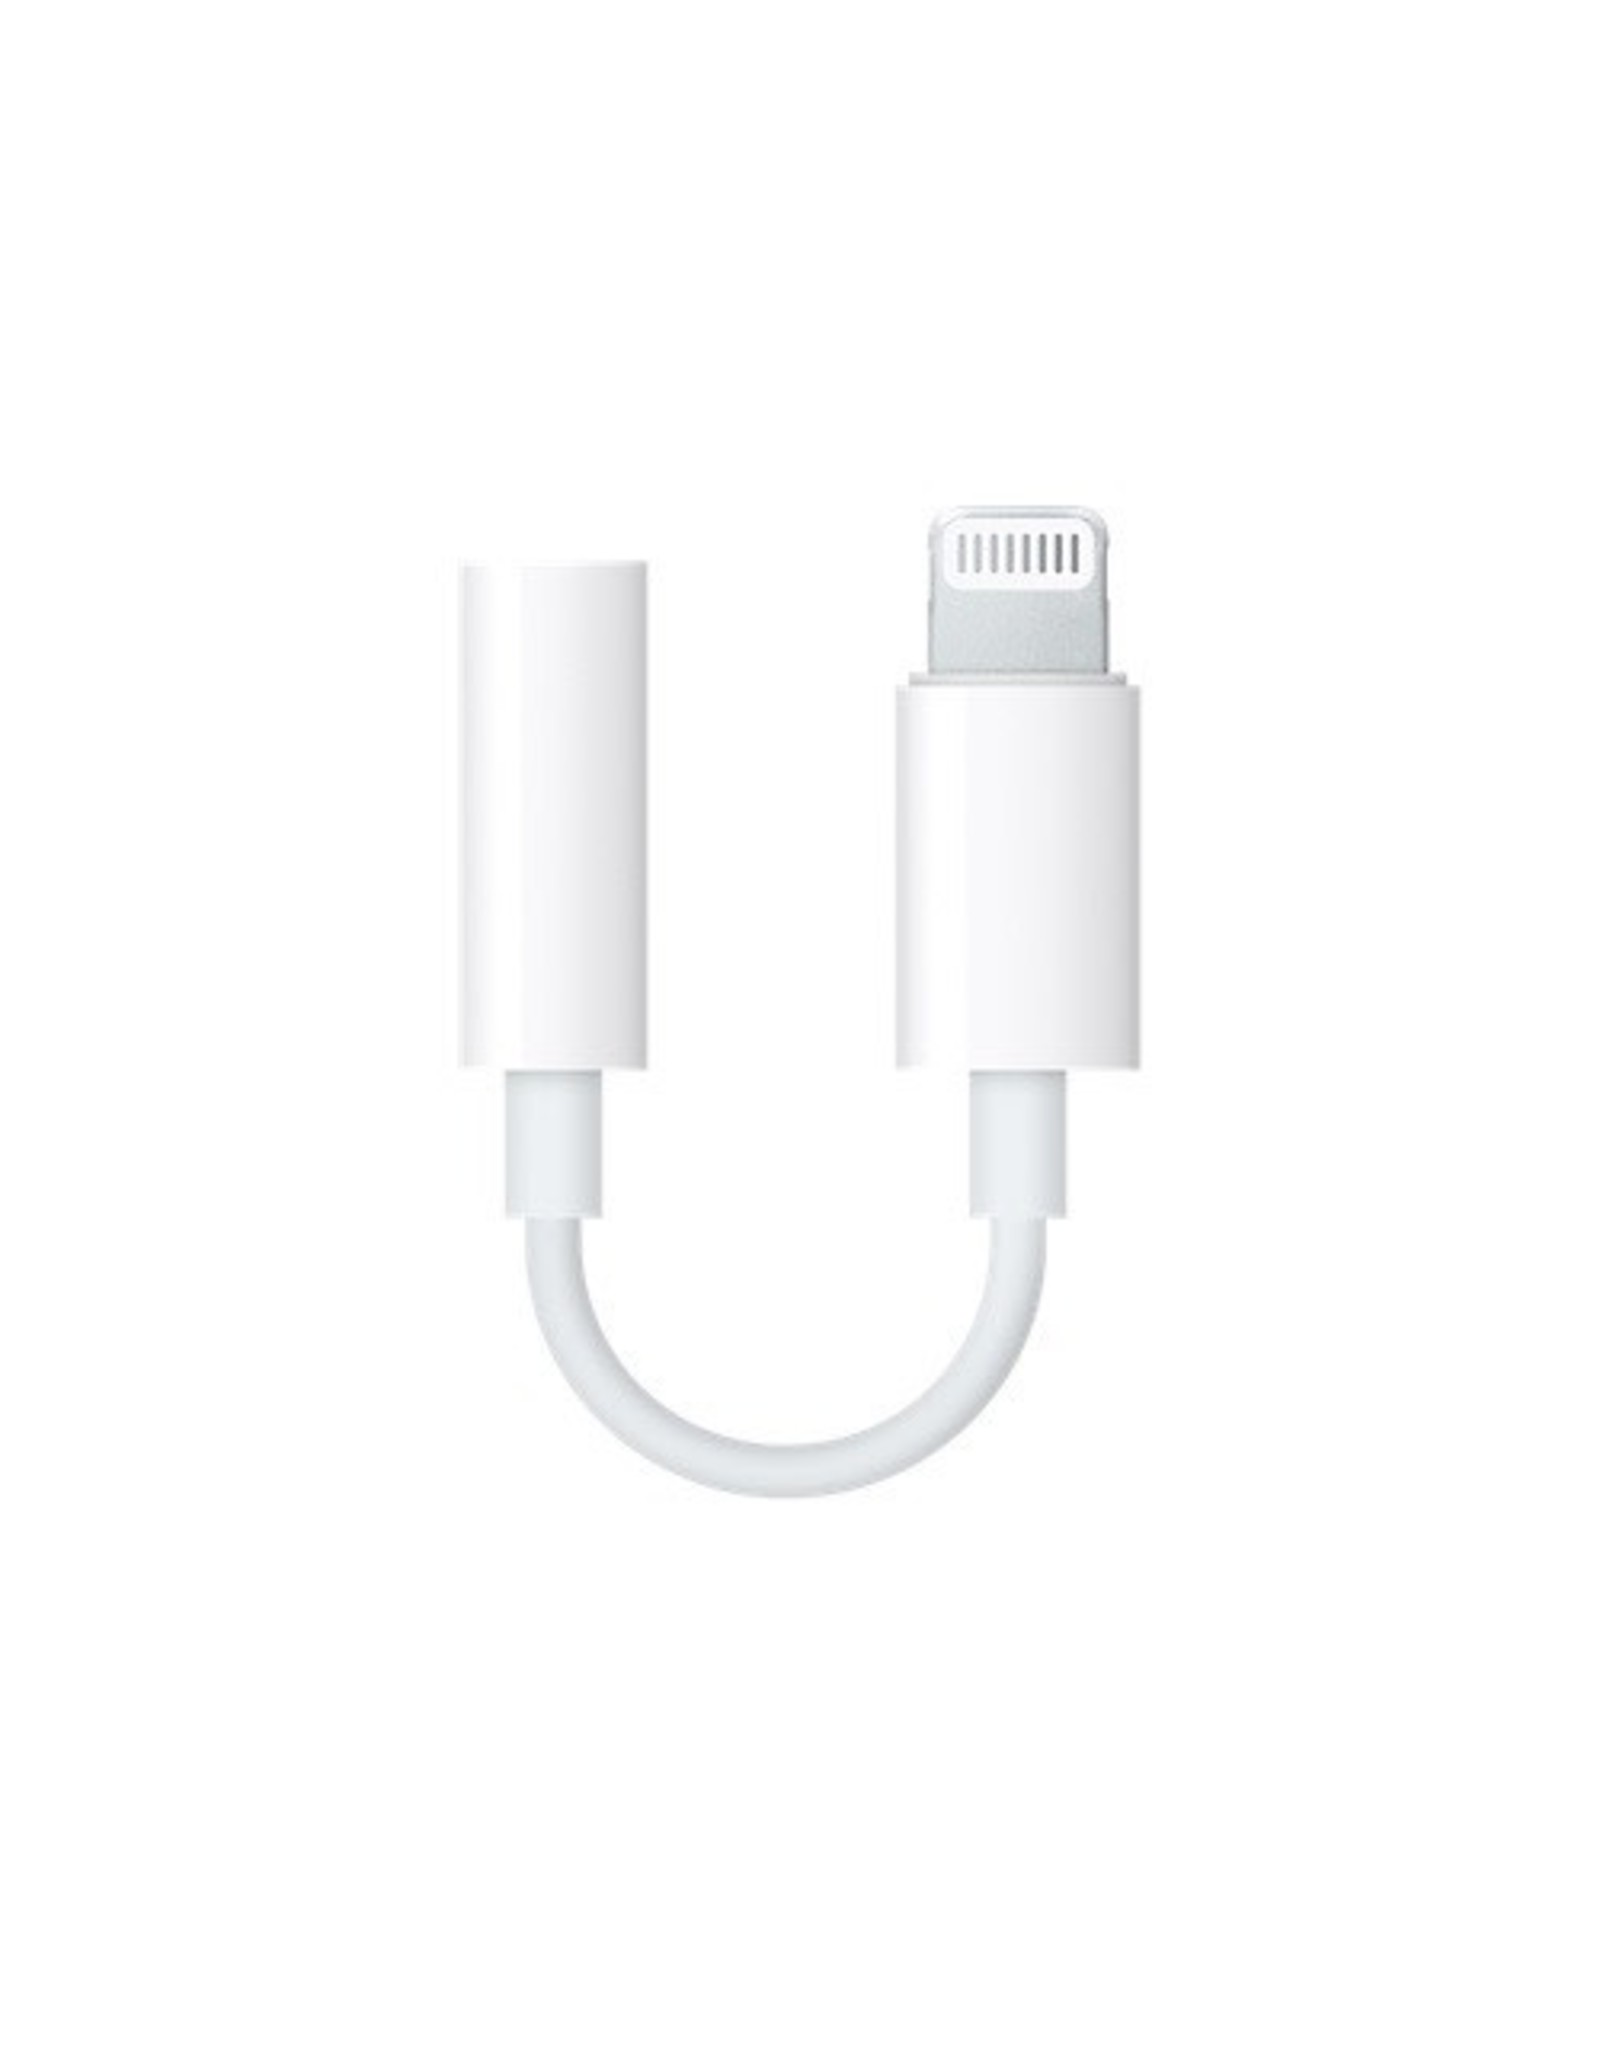 Apple Inst. Lightning to 3.5mm Headphone Jack Adapter - Central Tech Store